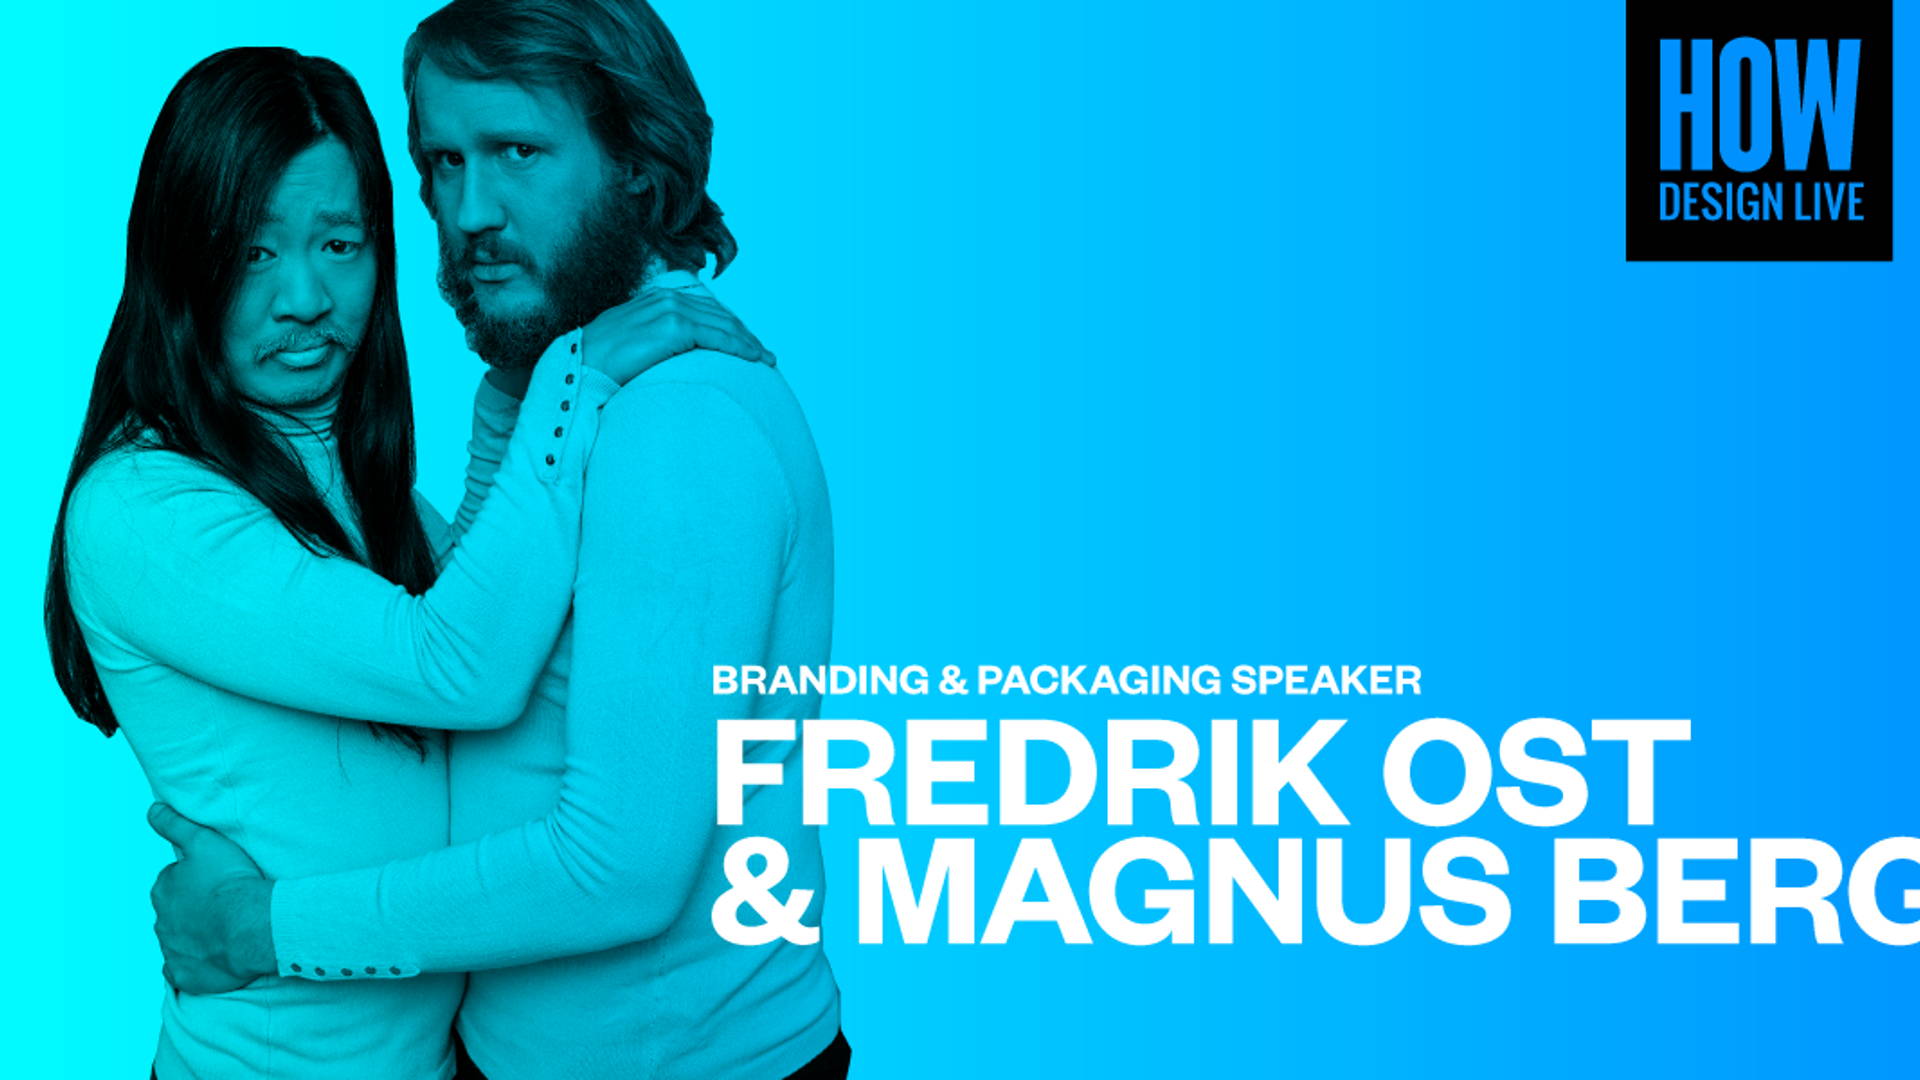 Featured image for Meet FREDRIK OST & MAGNUS BERG: BRANDING AND PACKAGING SPEAKERS FOR THE DIELINE @ HOW DESIGN LIVE